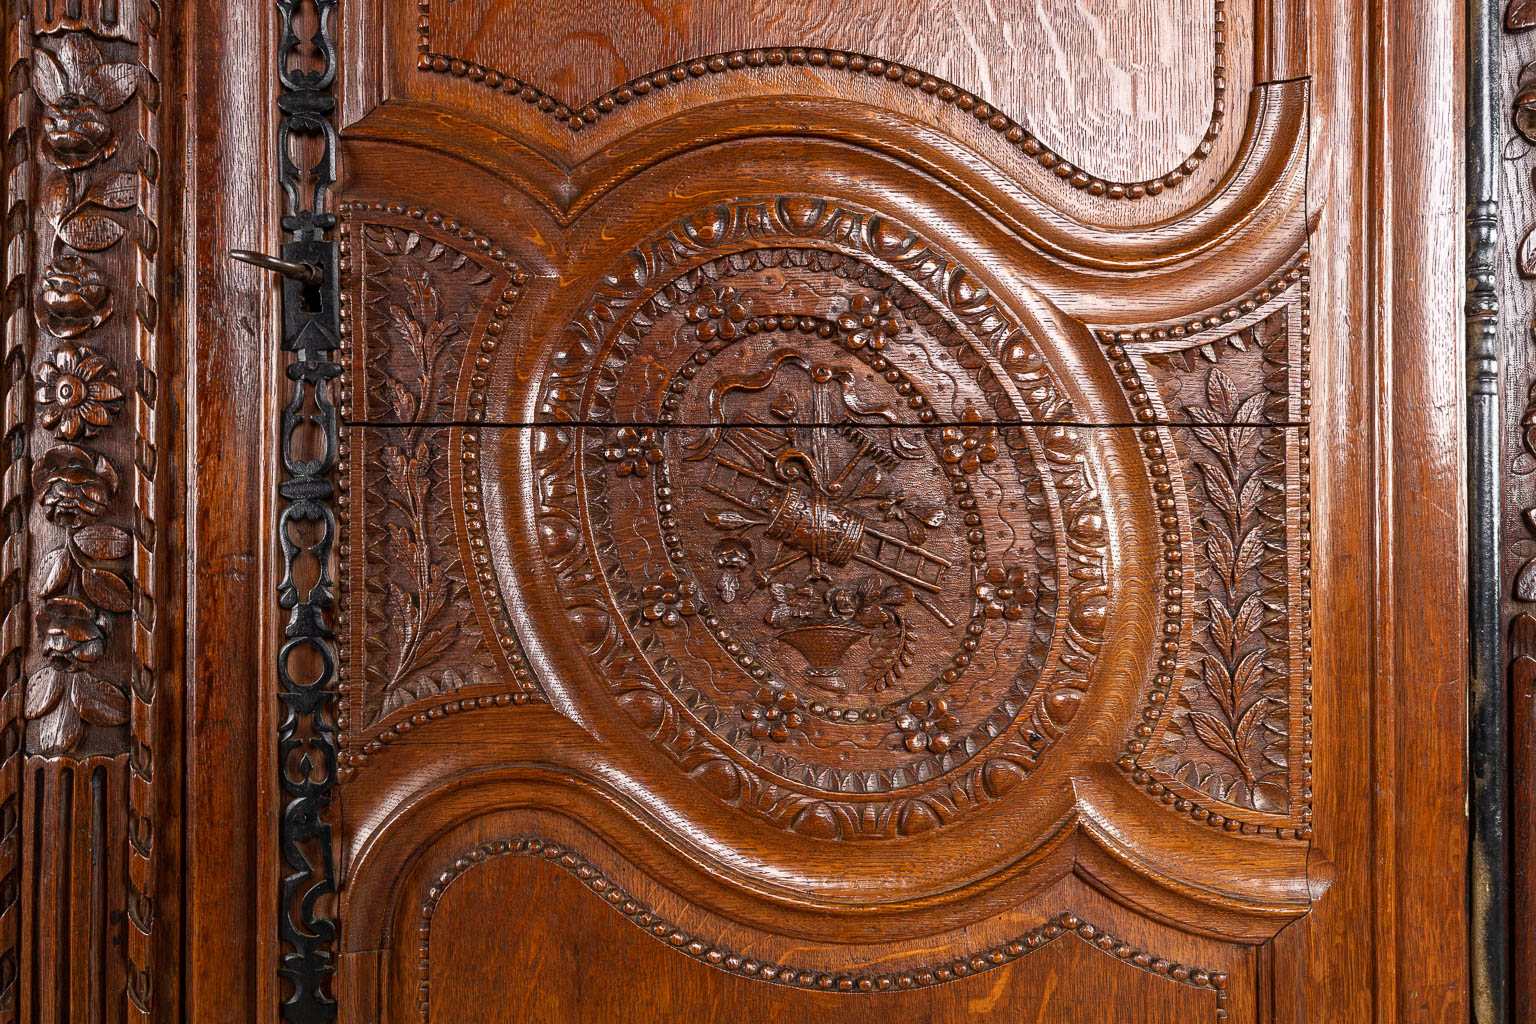 A richly sculptured and antique Normandy high cabinet, Armoire. France, 18th C.